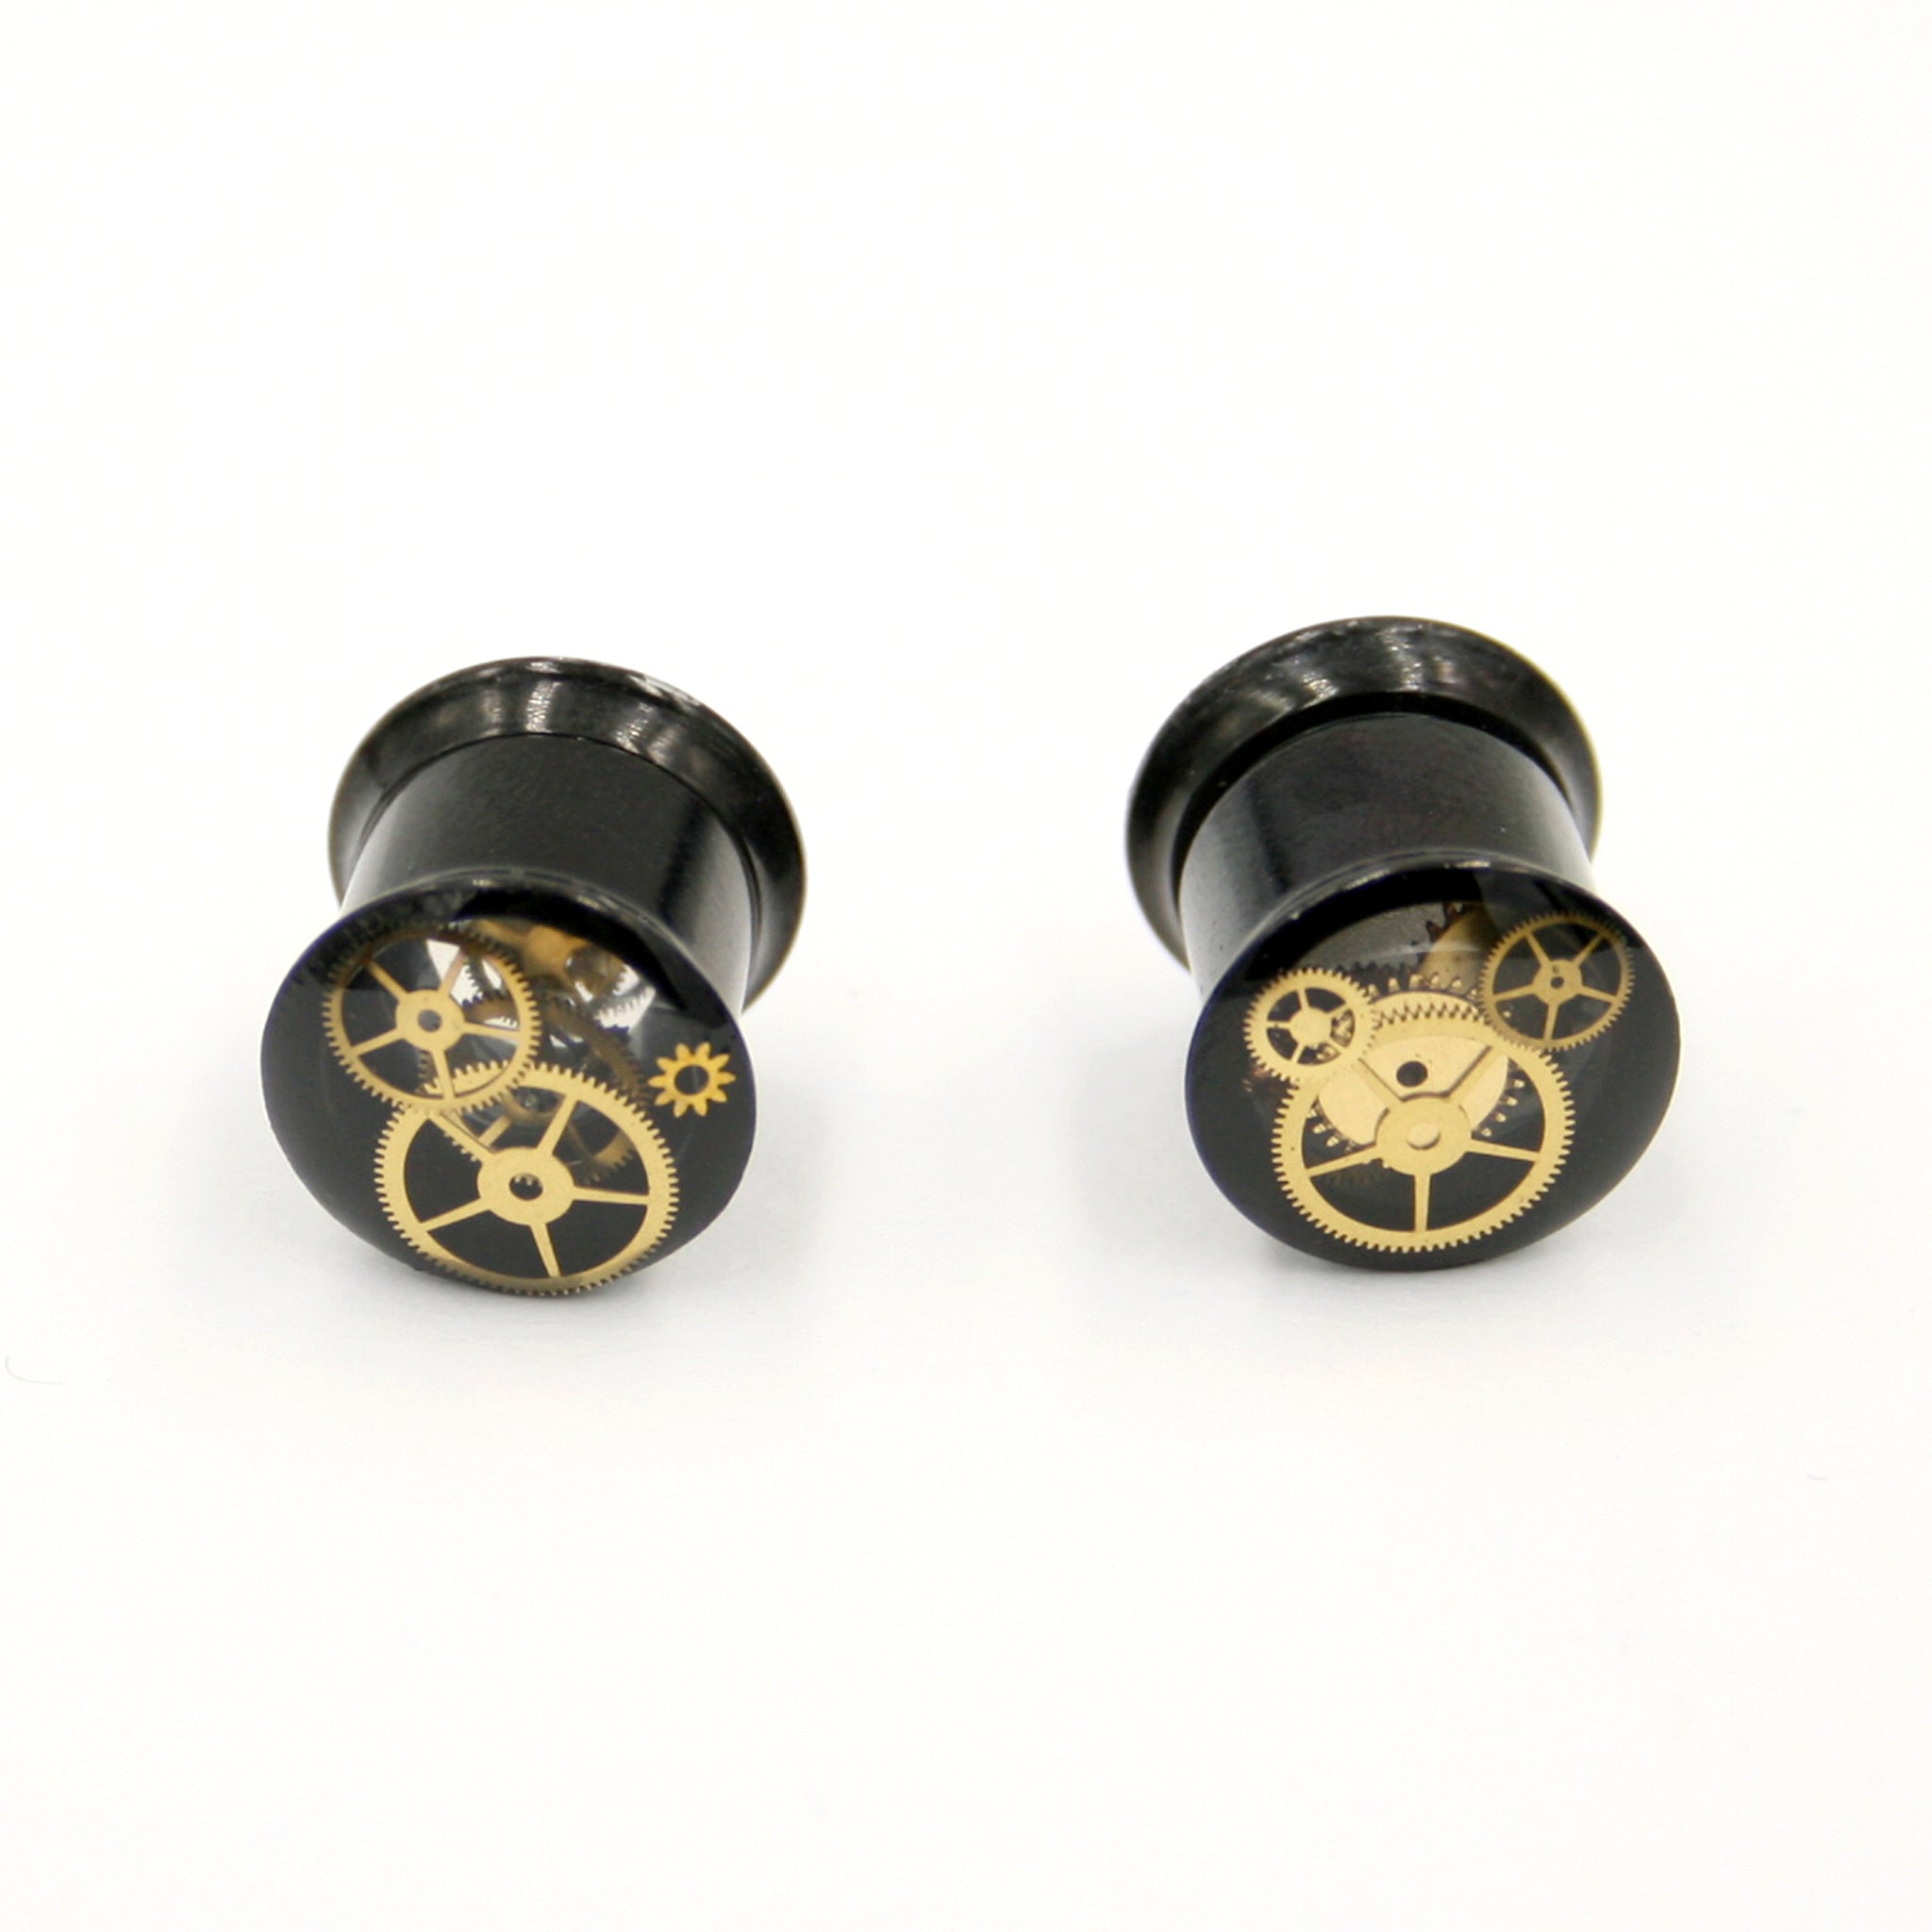 8mm small ear gauges in steampunk style